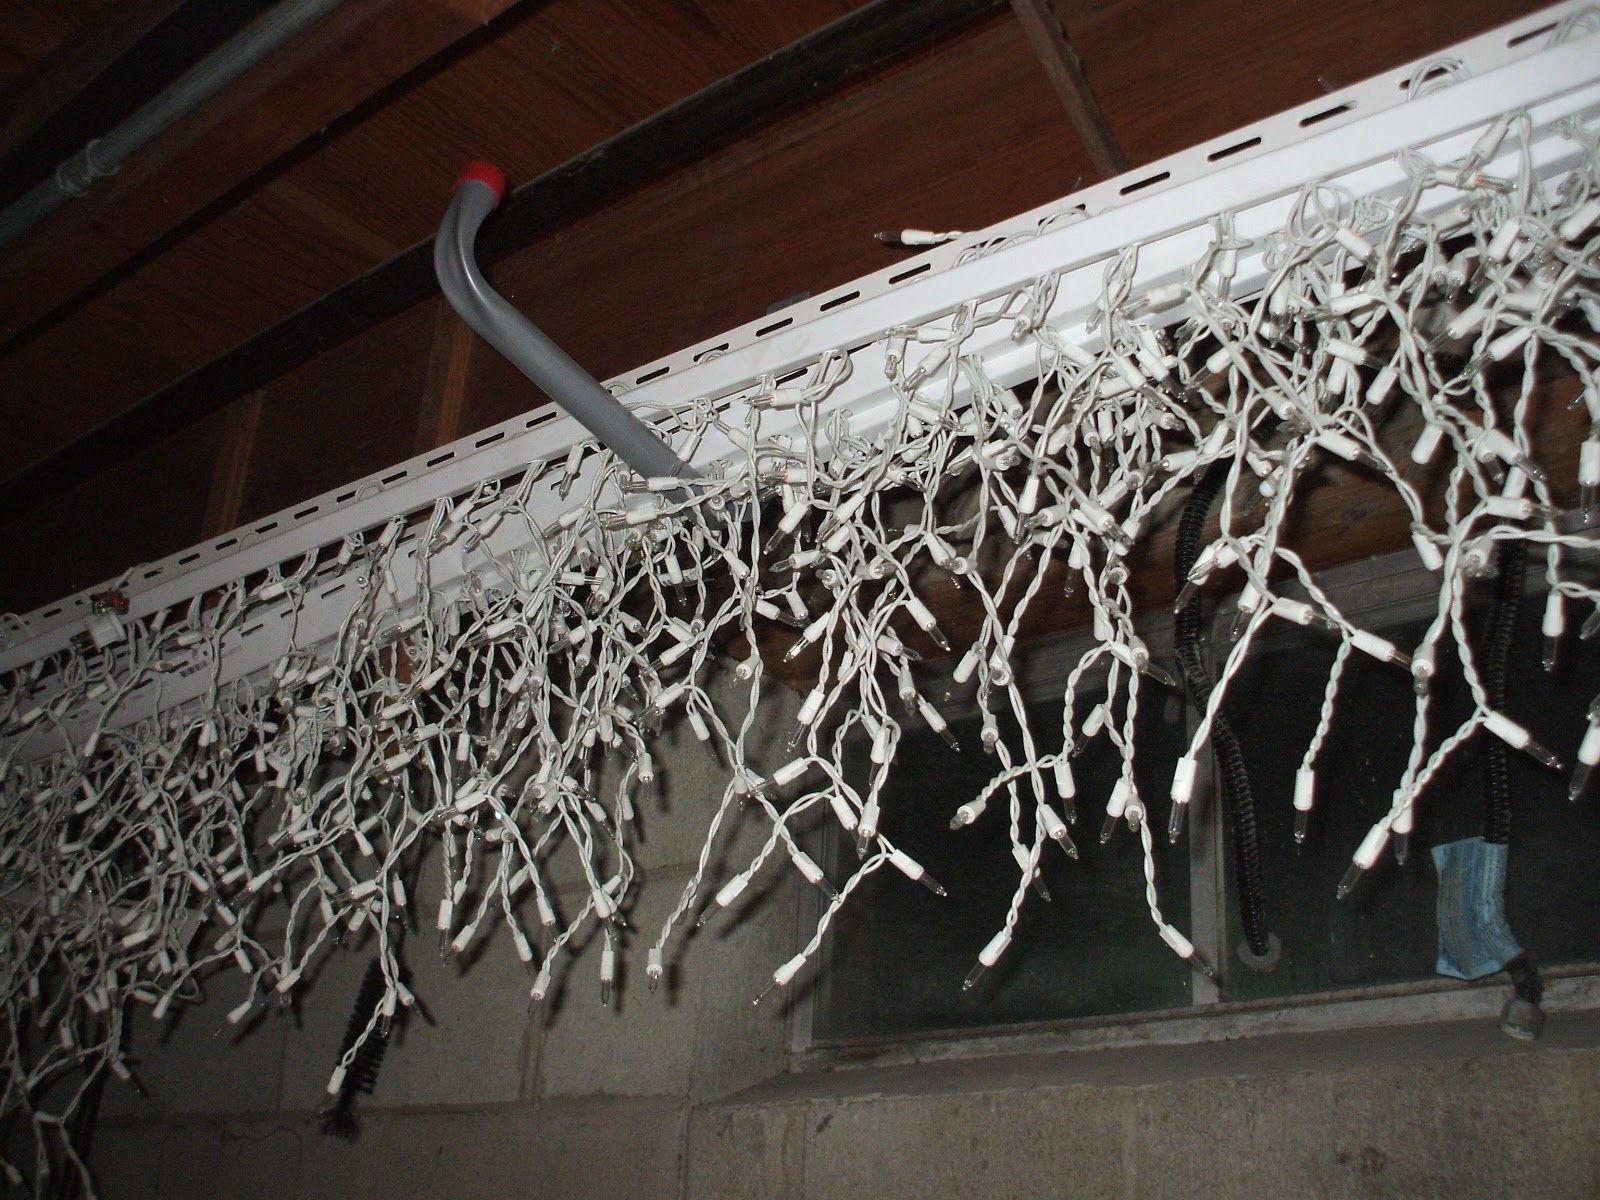 How To Hang Christmas Lights The Easy Way! – Rustic & Refined Throughout Outdoor Hanging Icicle Lights (View 7 of 15)